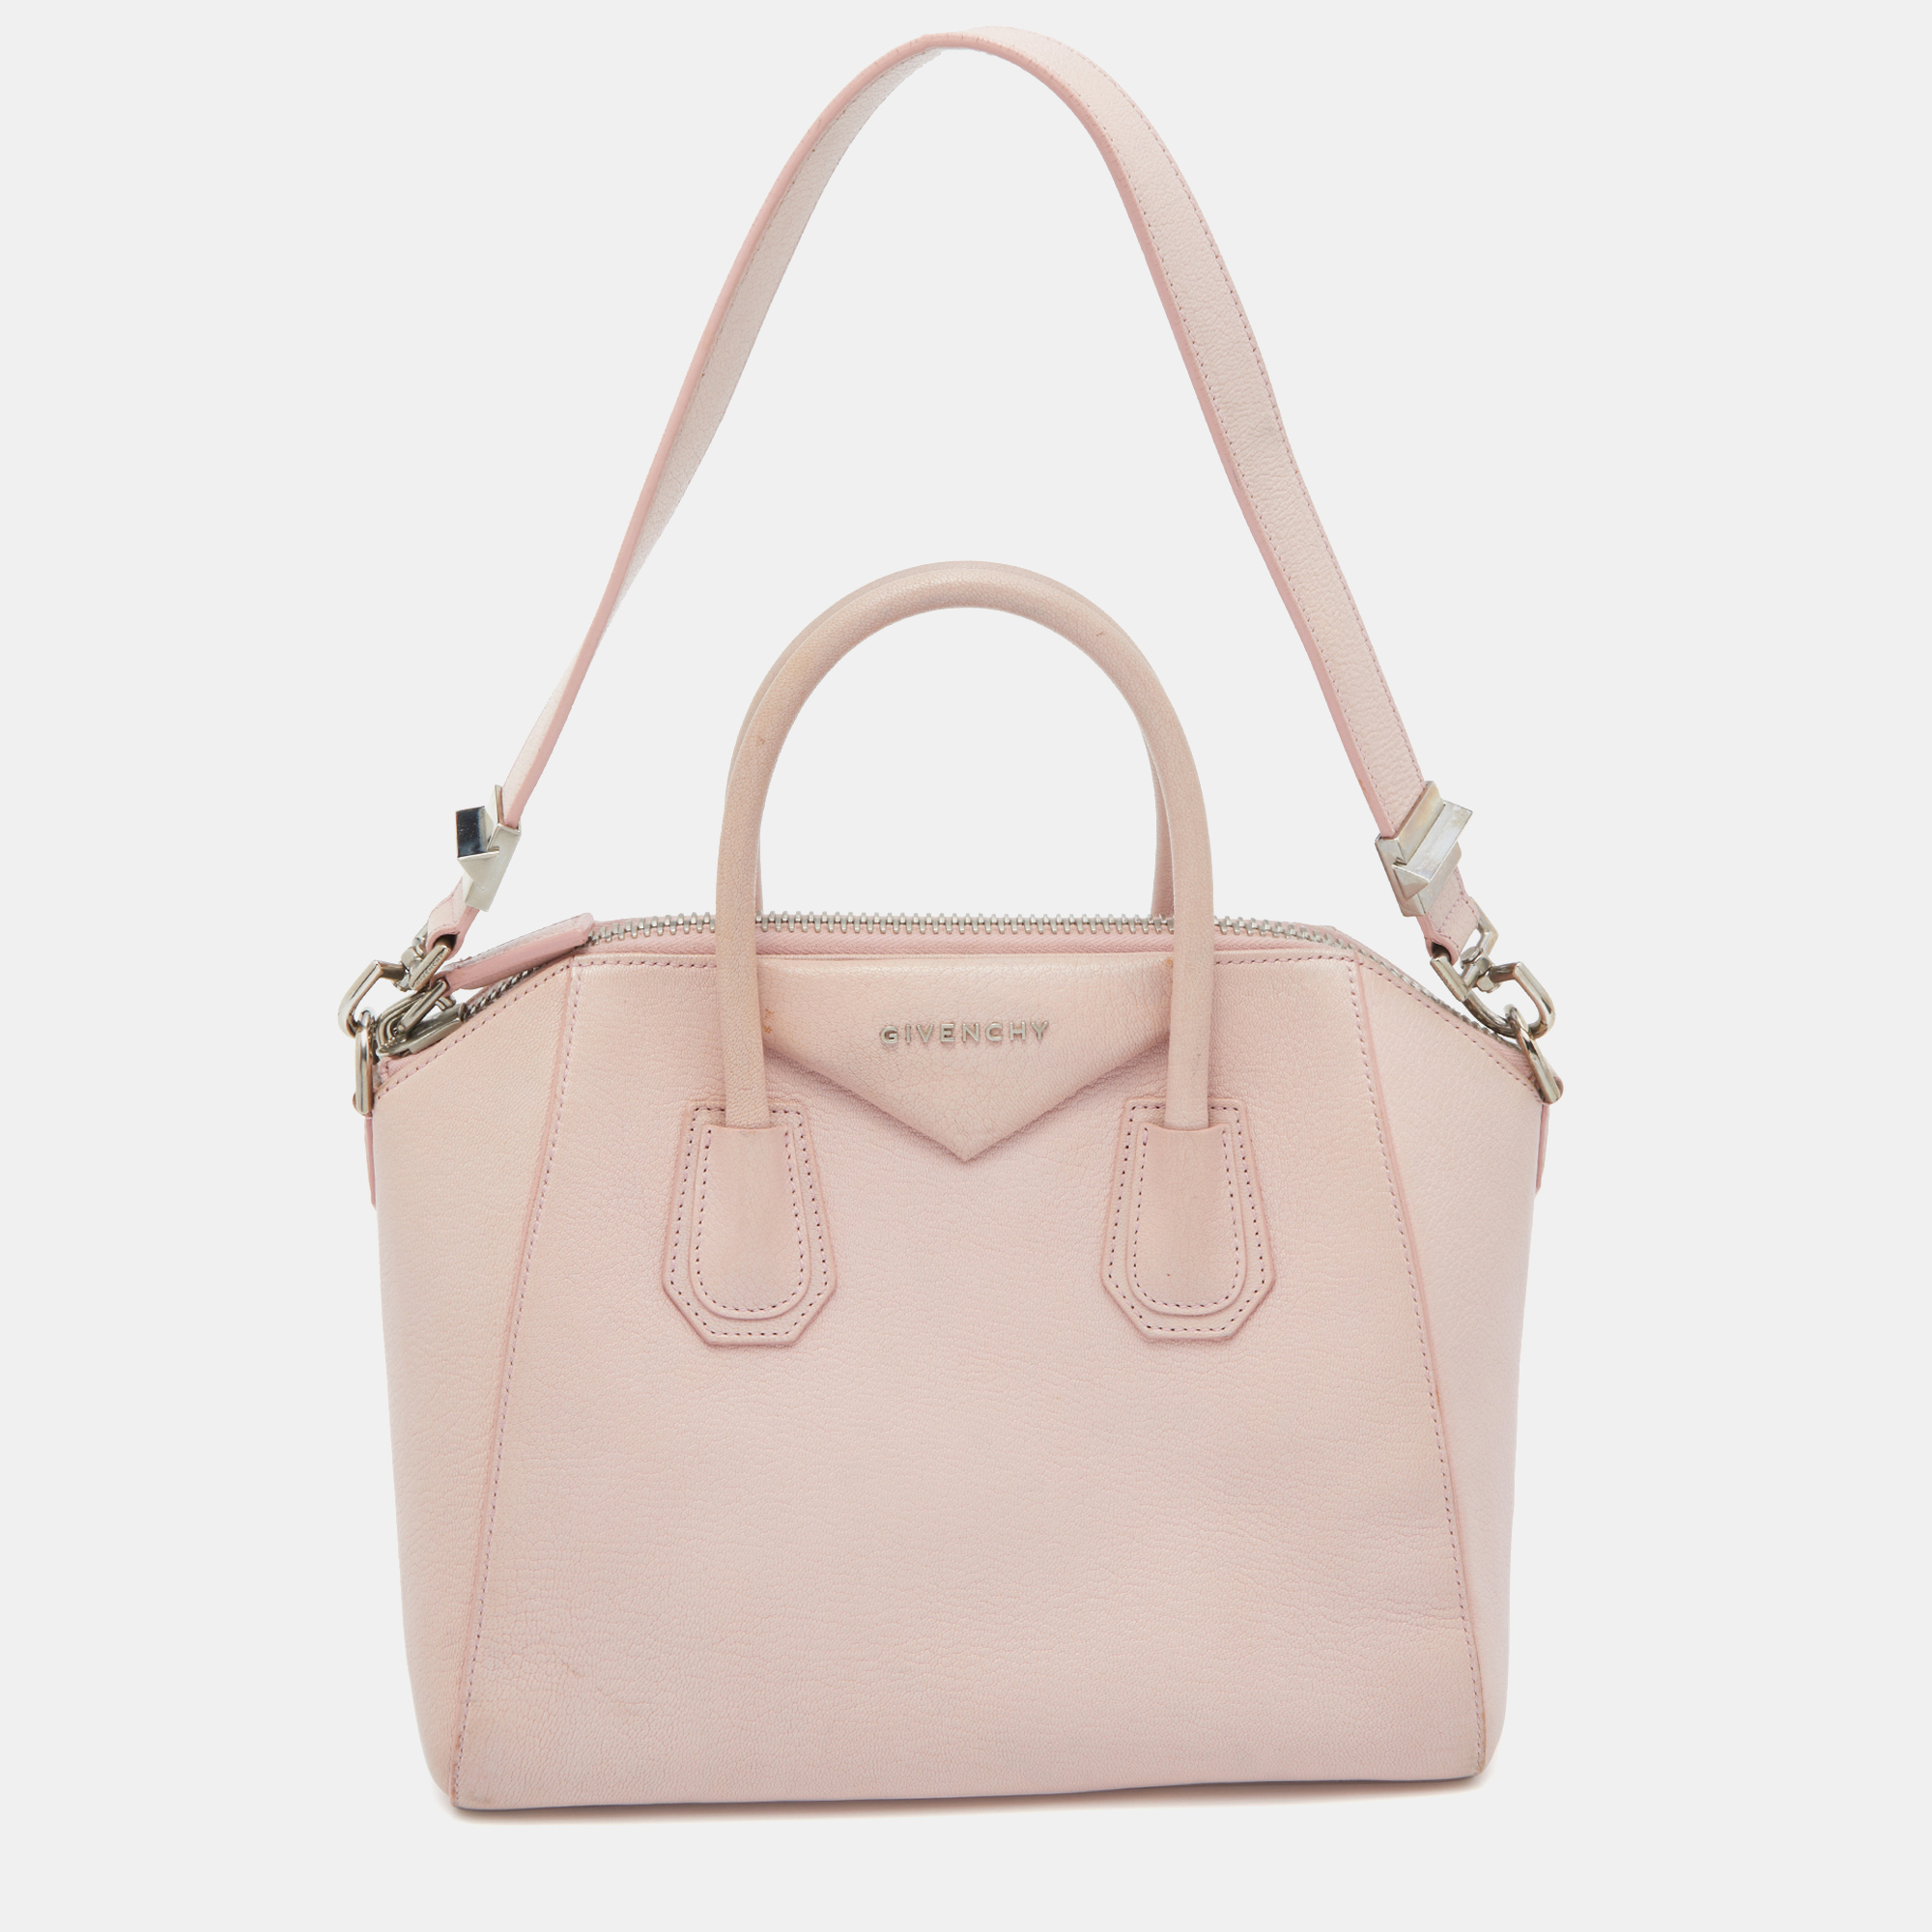 Pre-owned Givenchy Light Pink Leather Small Antigona Satchel